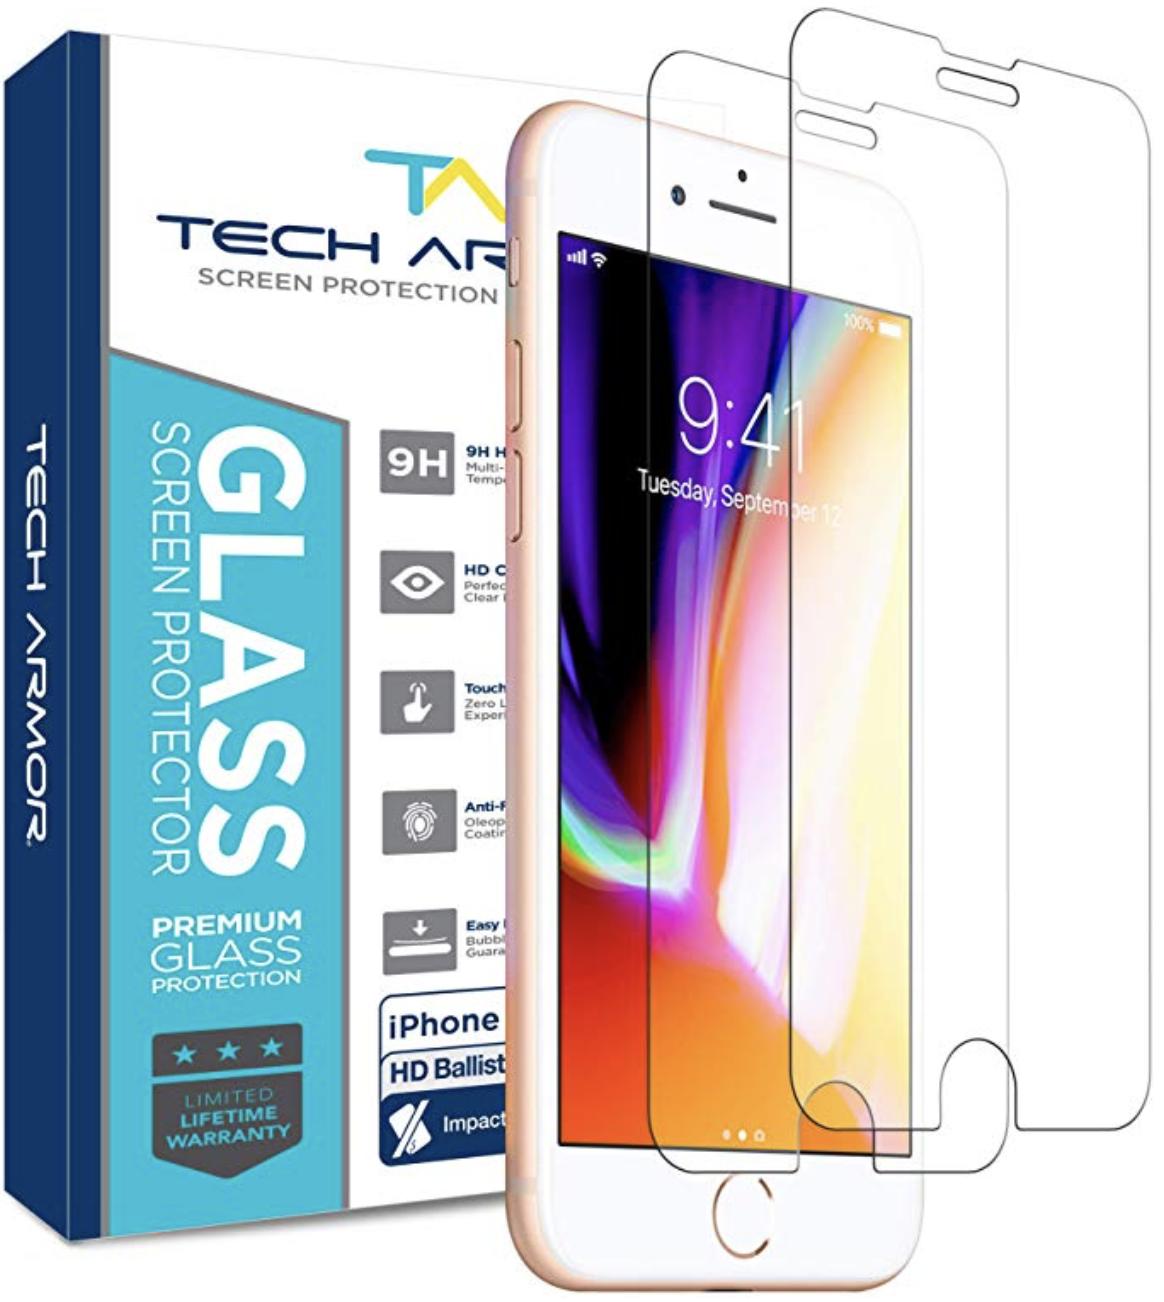 Screen Protector 3-Pack Apple iPhone 7 Plus iPhone 8 Plus Tech Armor HD-Clear Film 5.5 inch